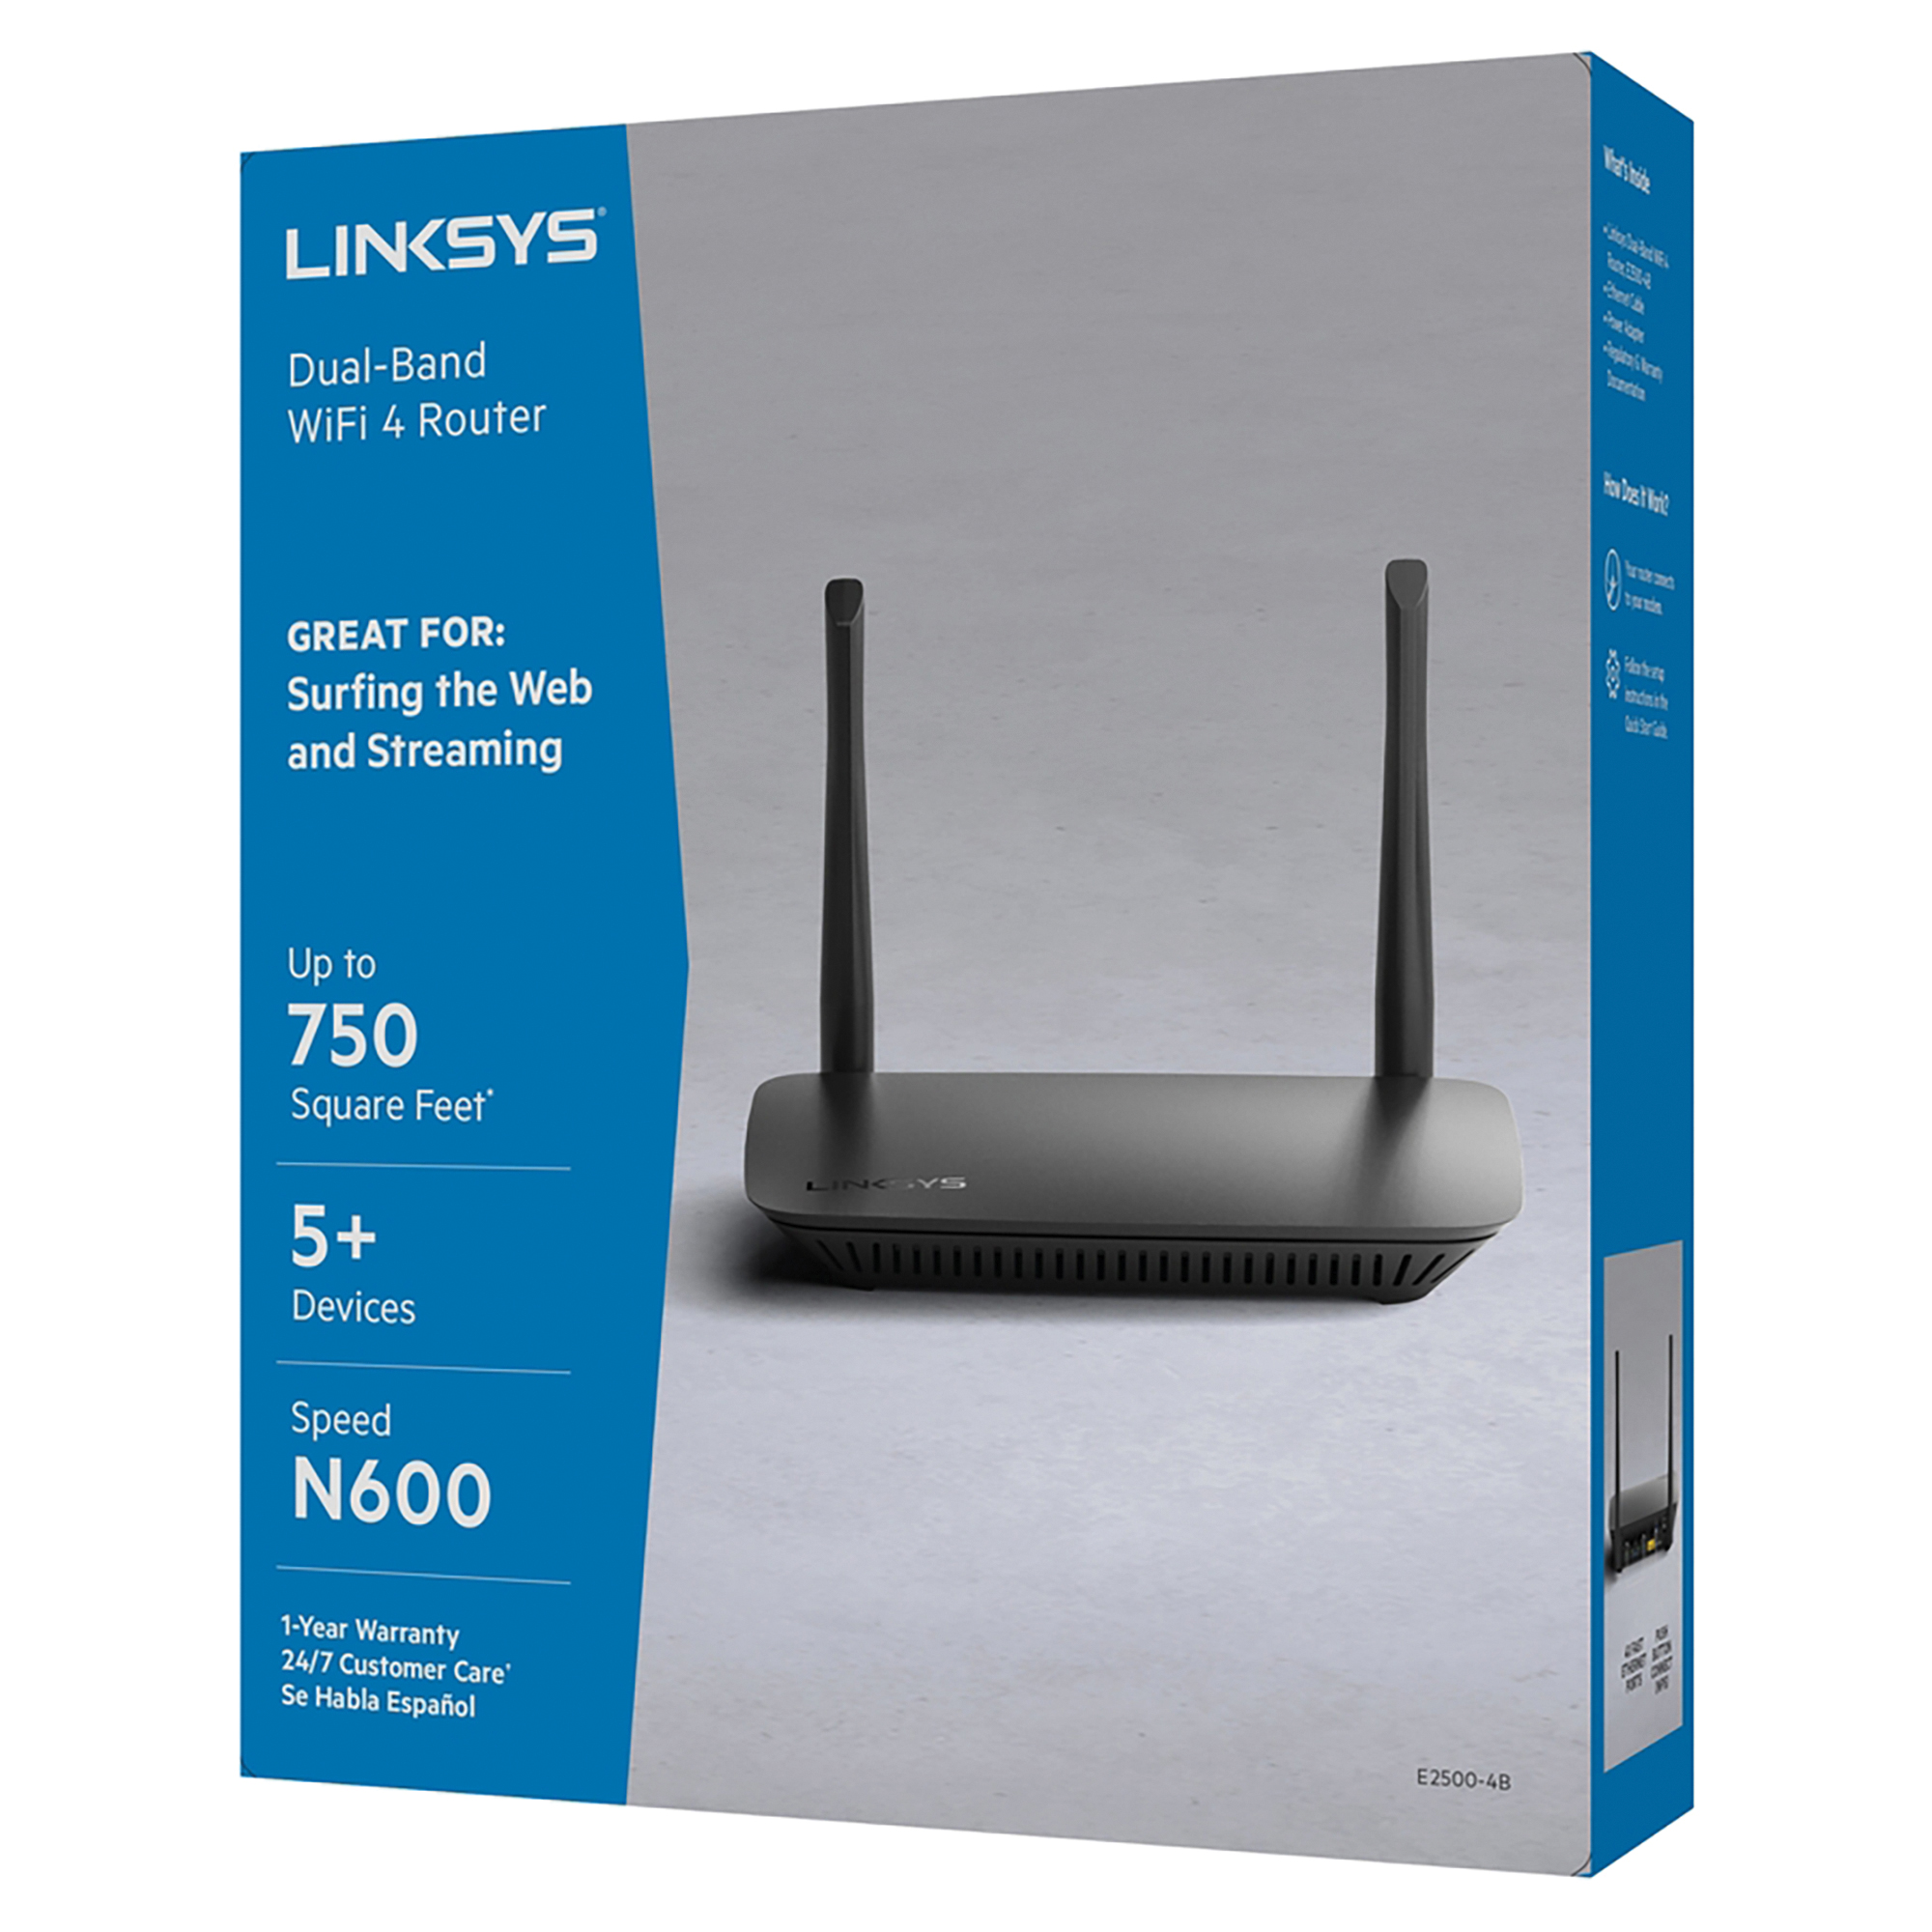 Linksys E2500 N600 Dual-Band WiFi Router - image 3 of 9